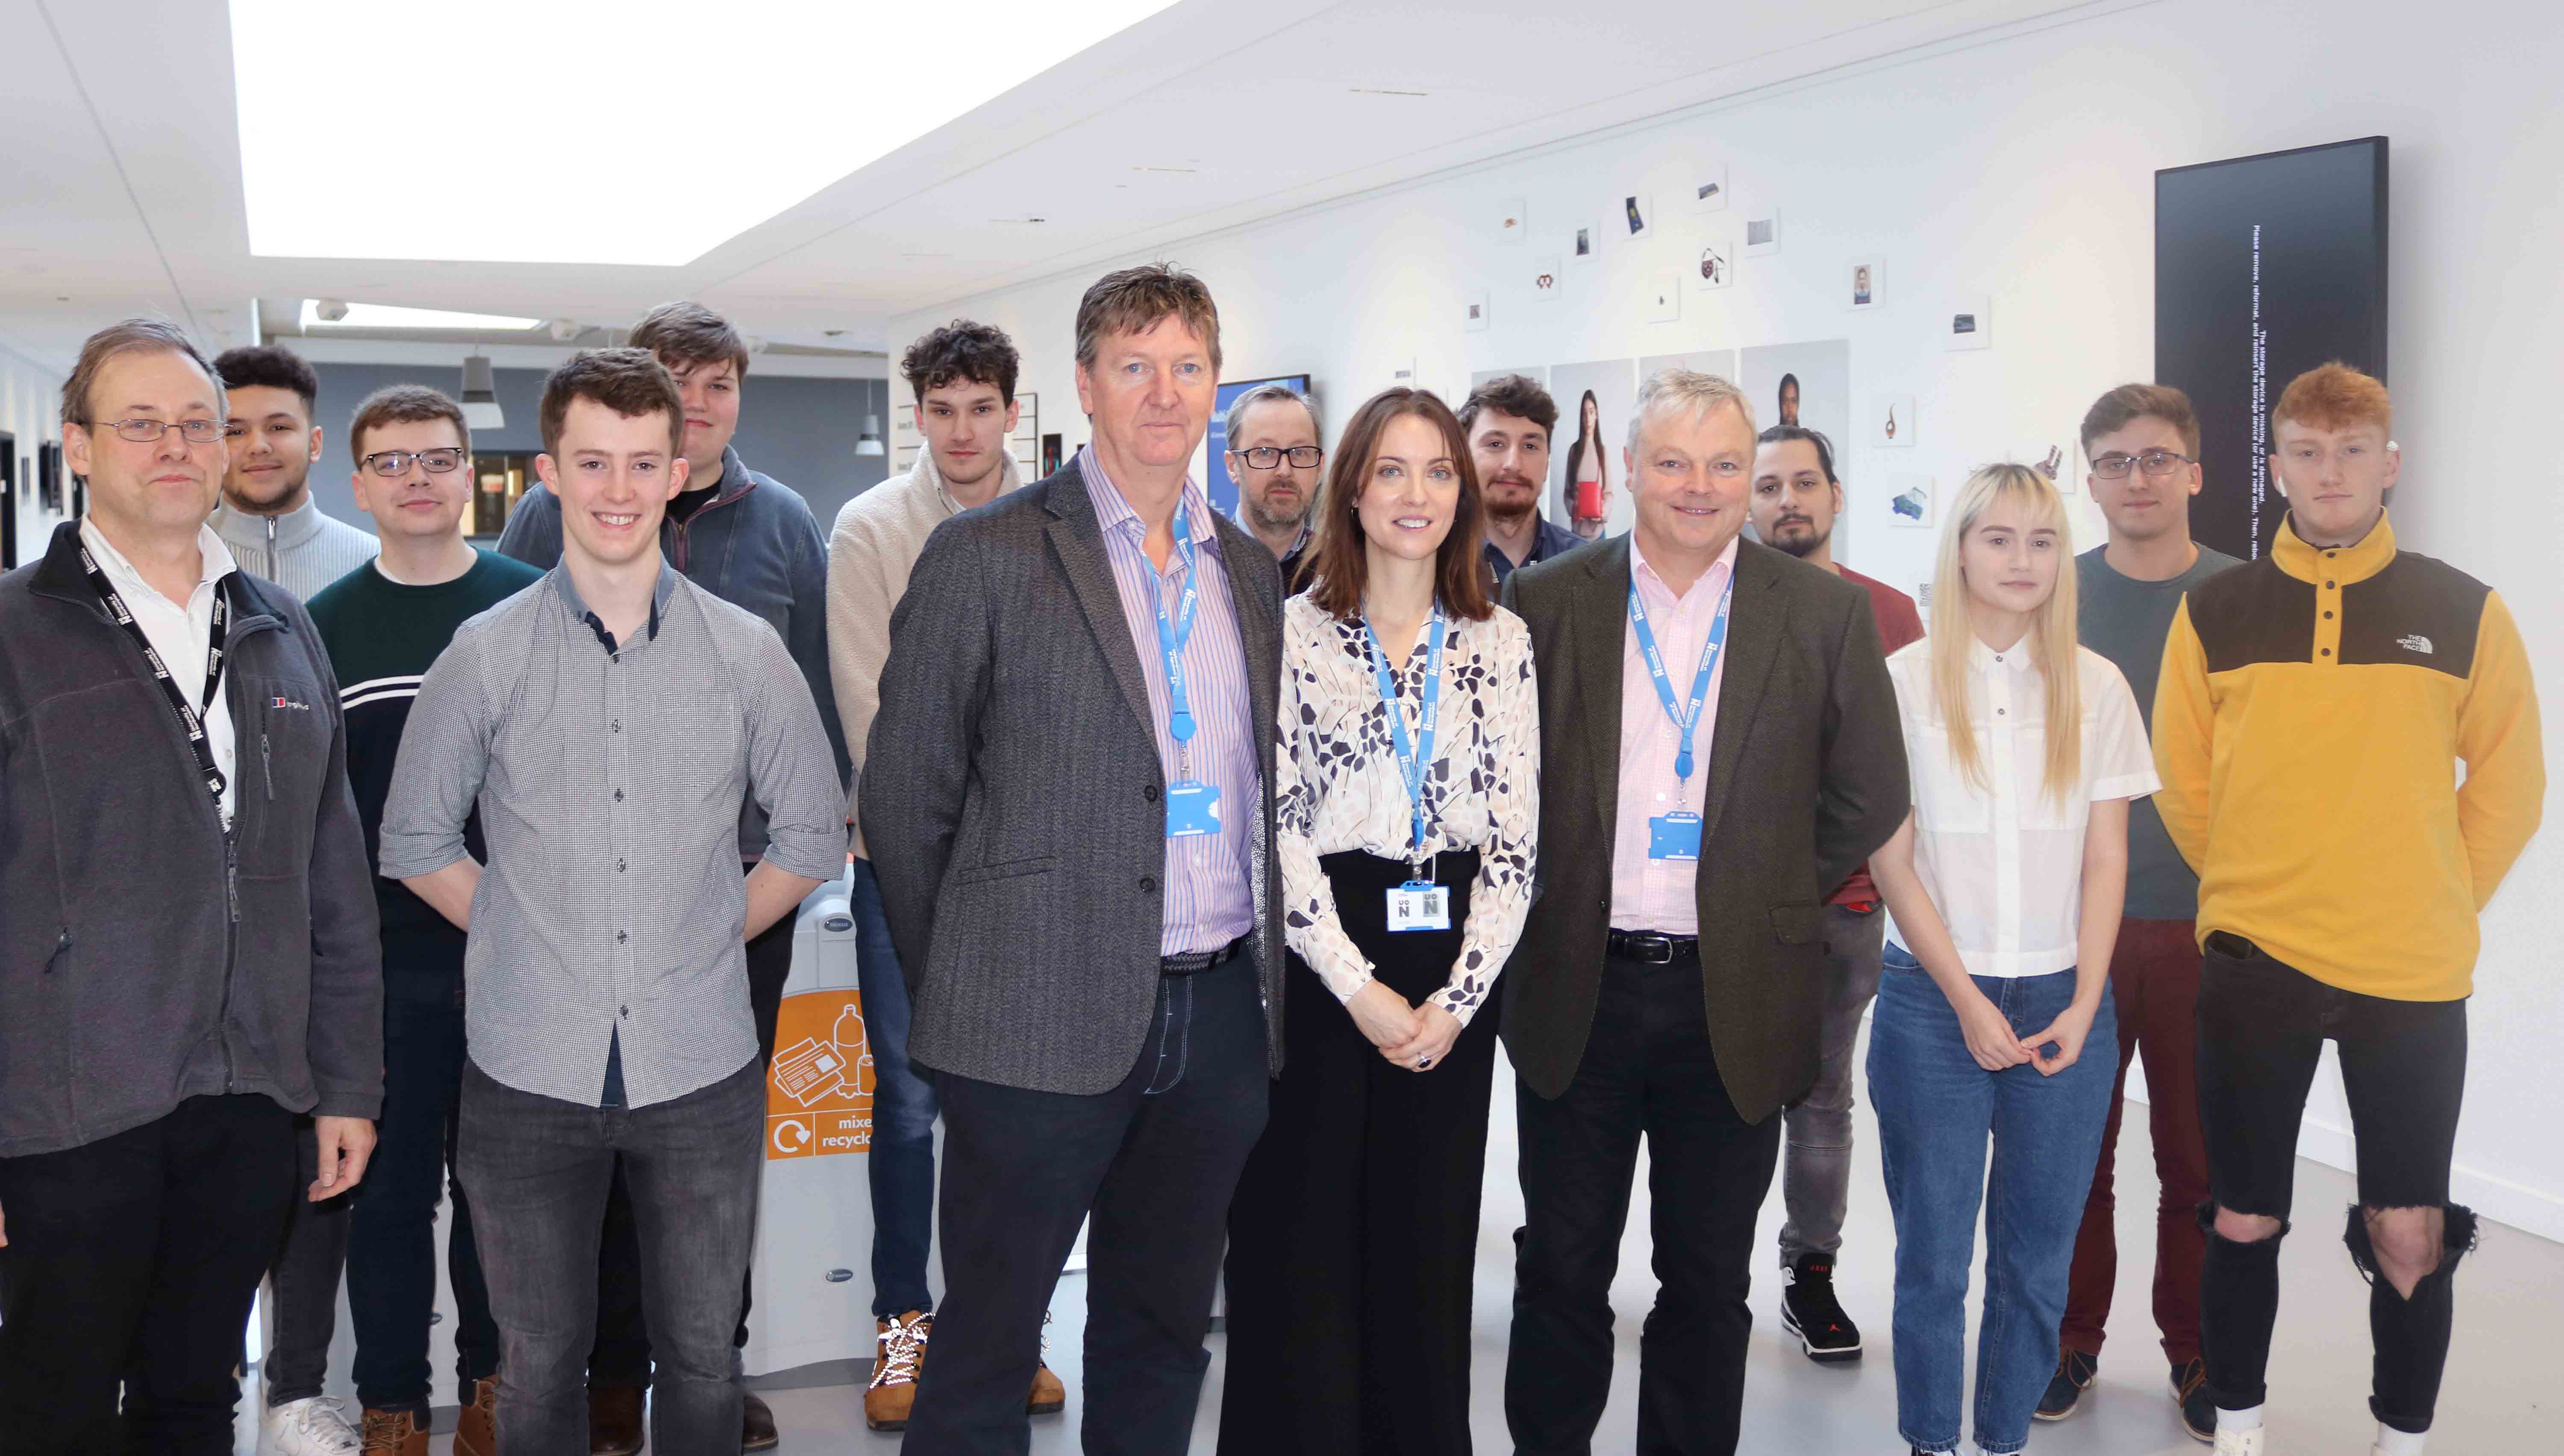 Image of Product Design students with the Haddonstone team.